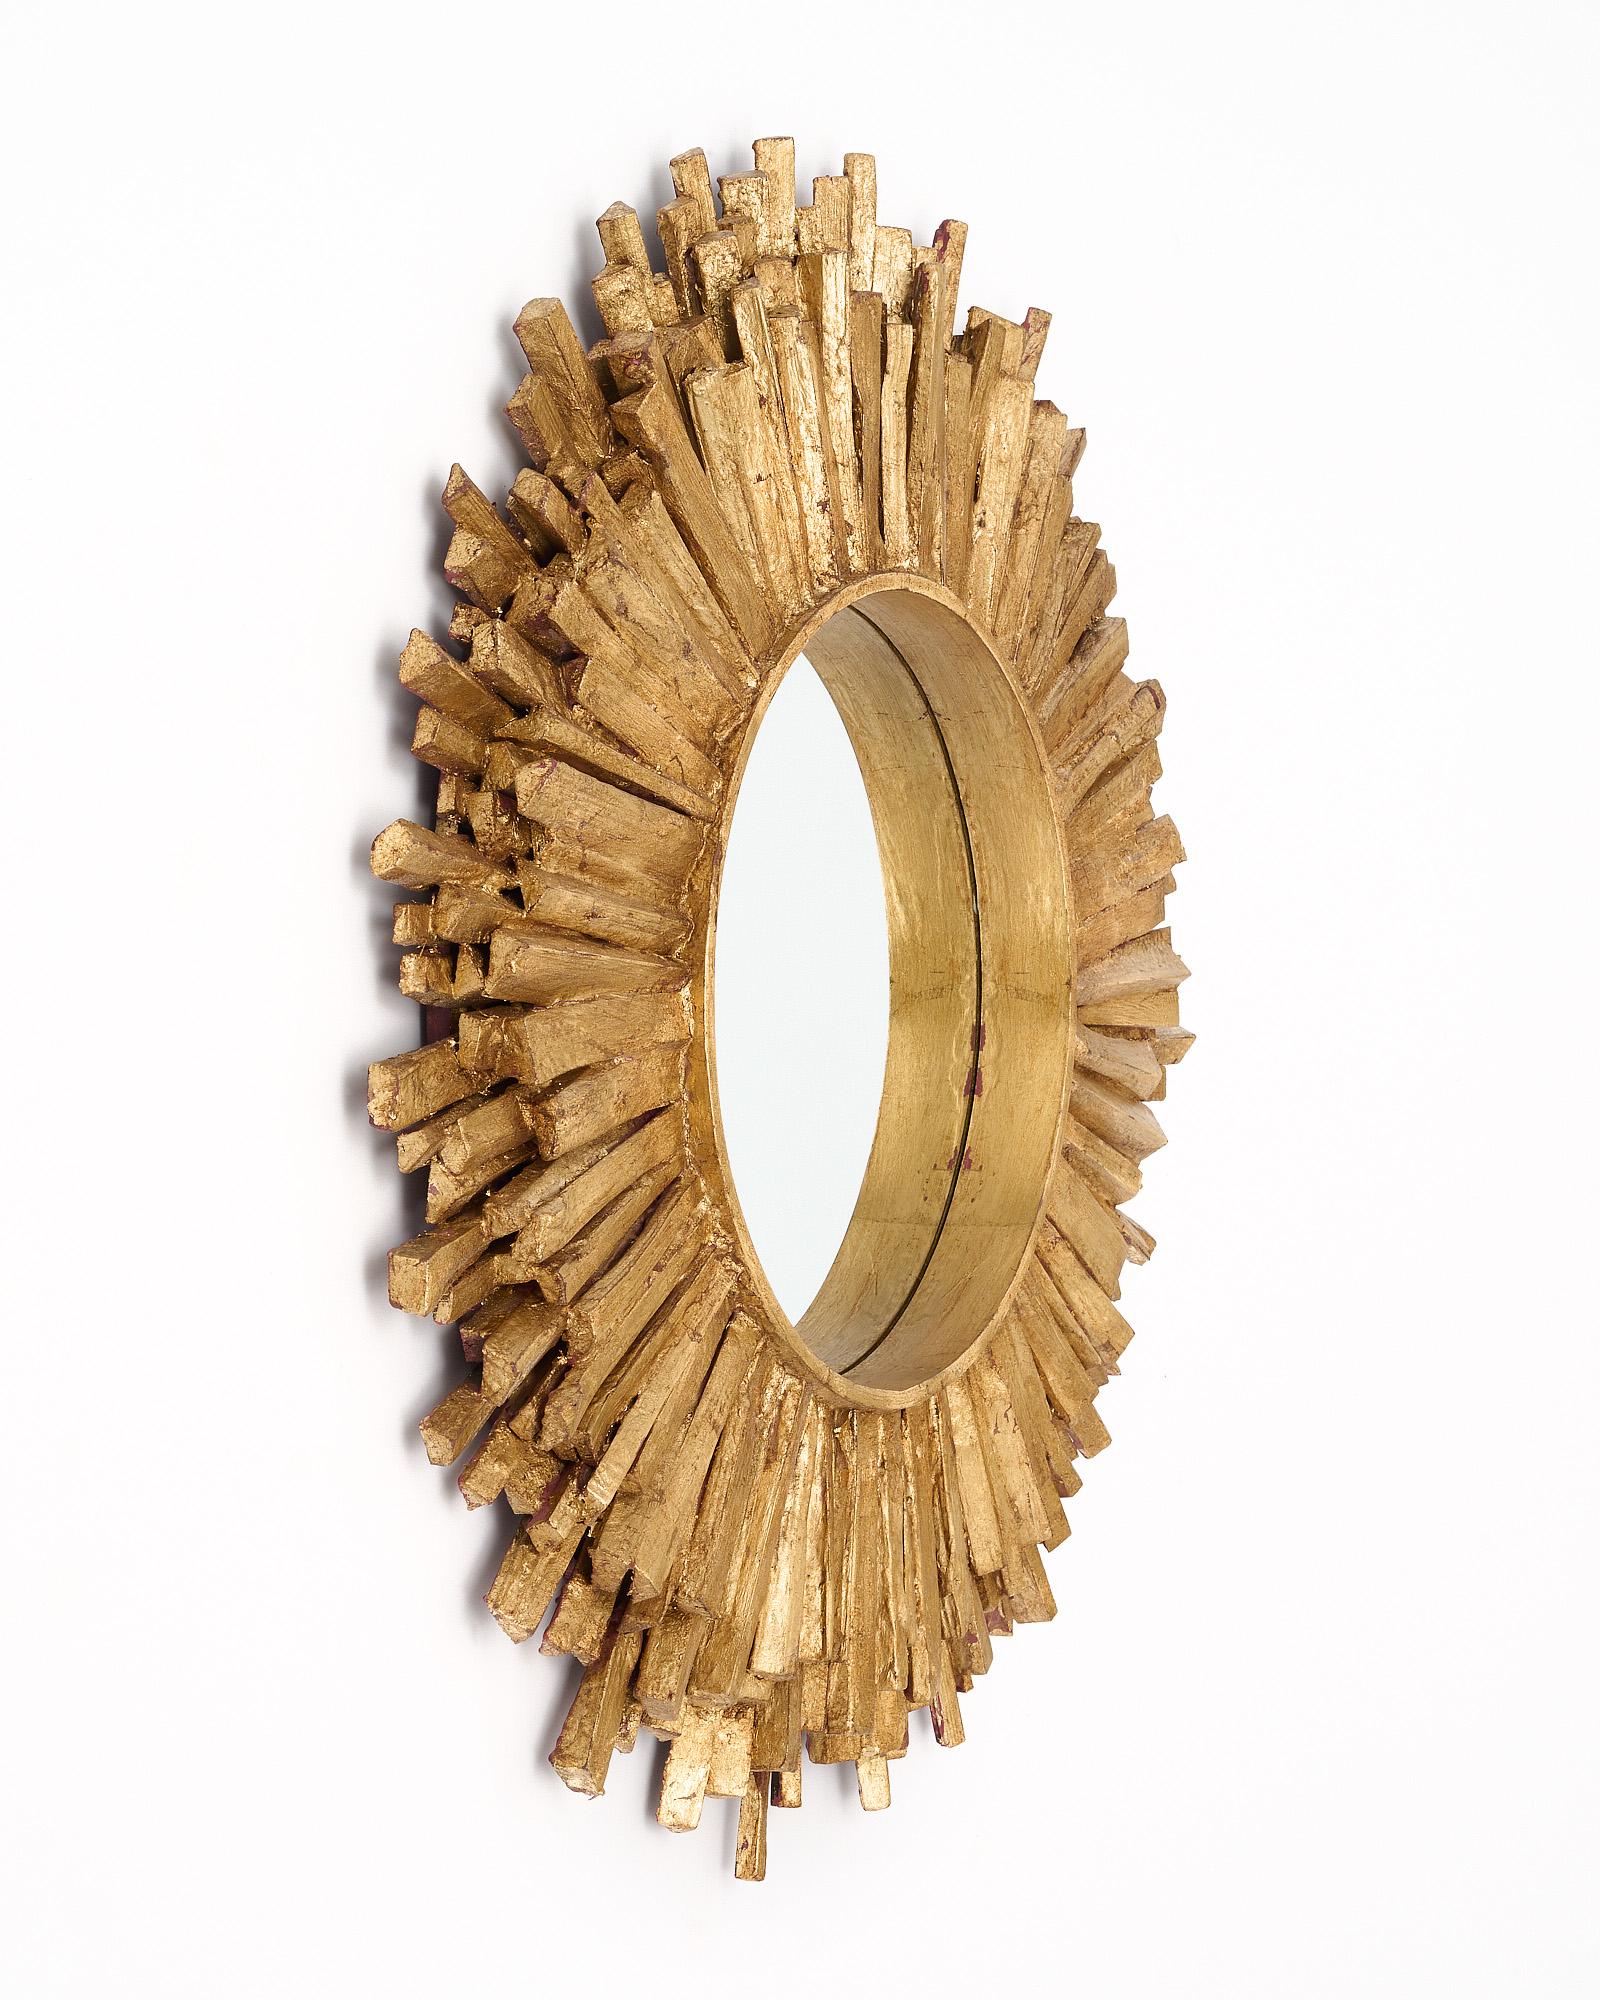 Sunburst mirror from Spain with a circular central mirror and gold-leafed rays emanating outwards to form a striking sunburst effect. This highly decorate pieces is quite effective.